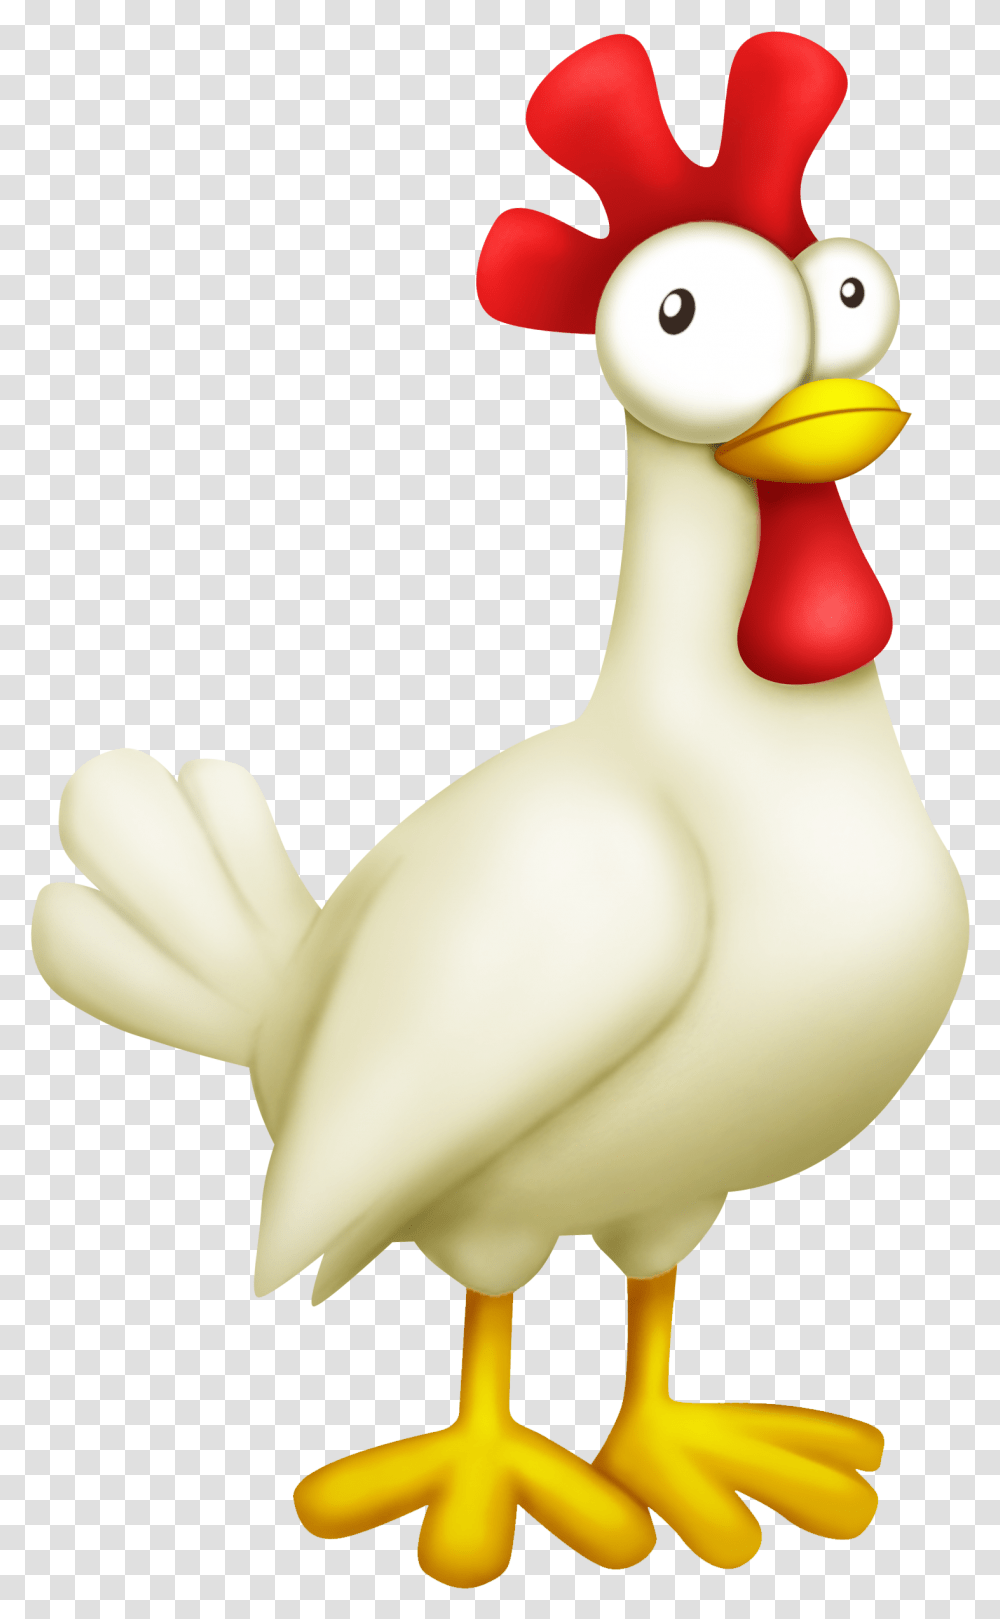 Flying Bird Water Hay Hq Image Hay Day Chicken, Animal, Duck, Dodo, Snowman Transparent Png